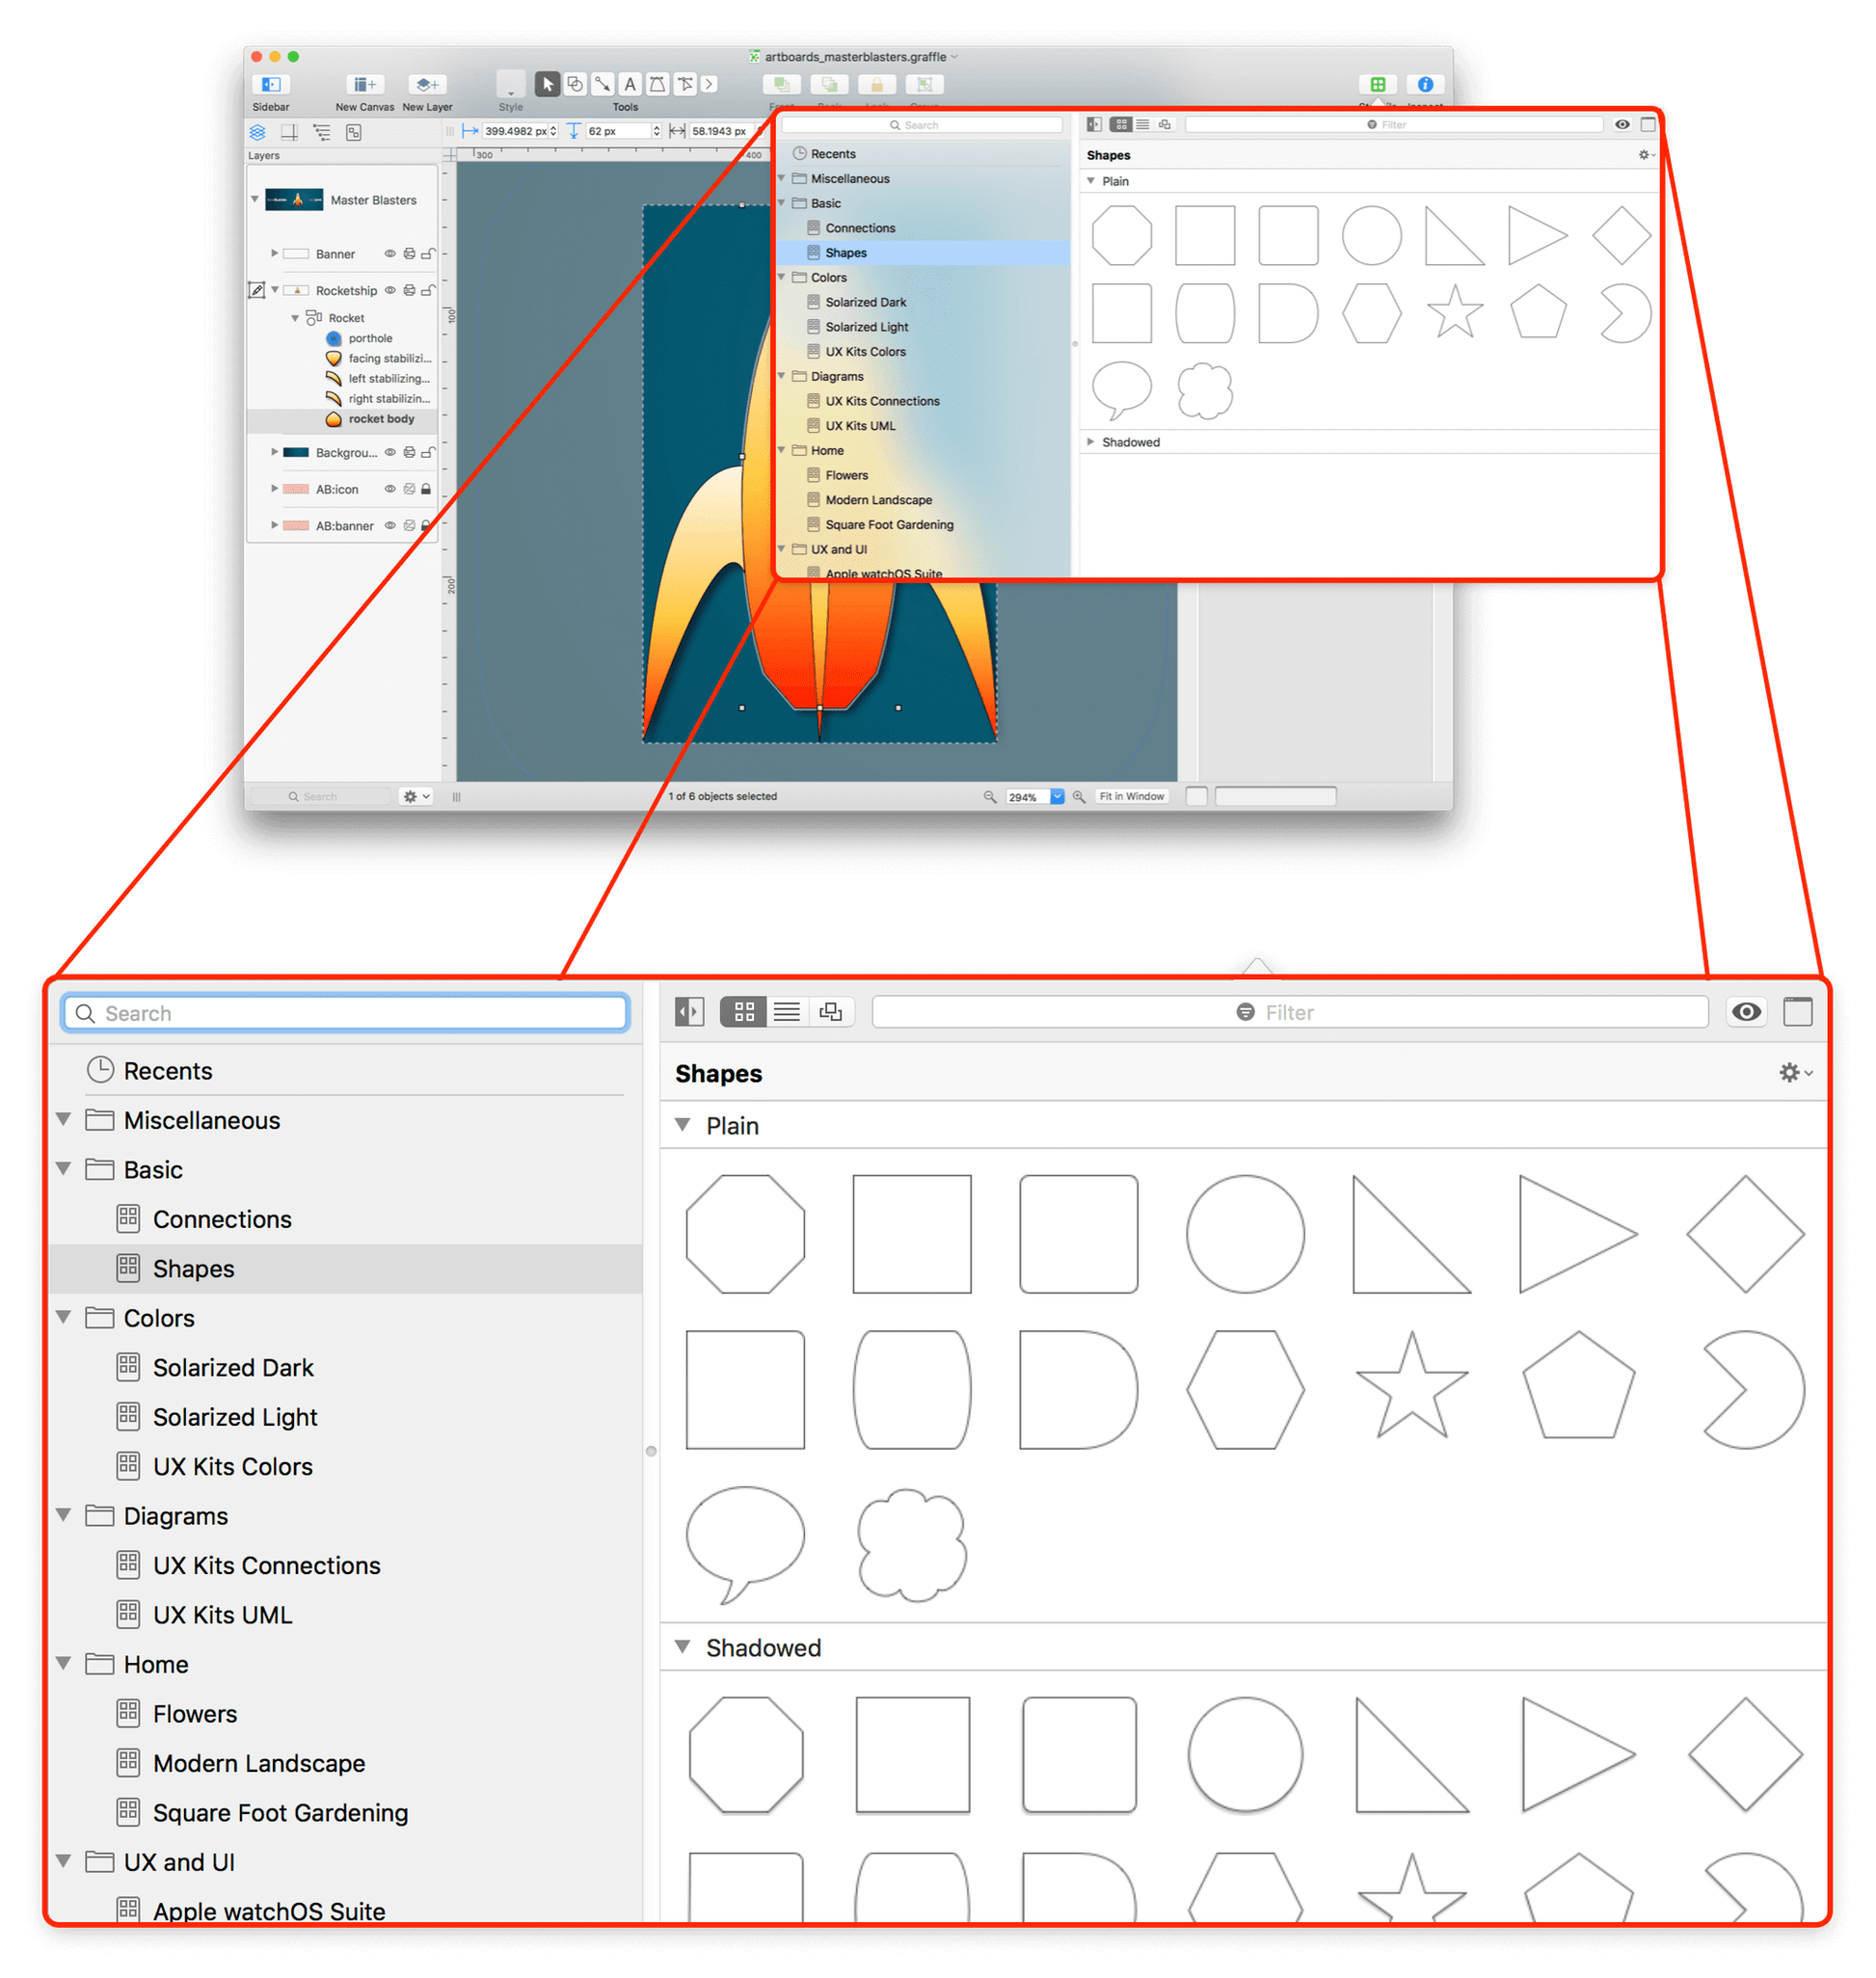 An exploding view of OmniGraffle, showing the Stencil Browser in a popup window available from the toolbar, shown in a much larger scale than in the full window in the background.